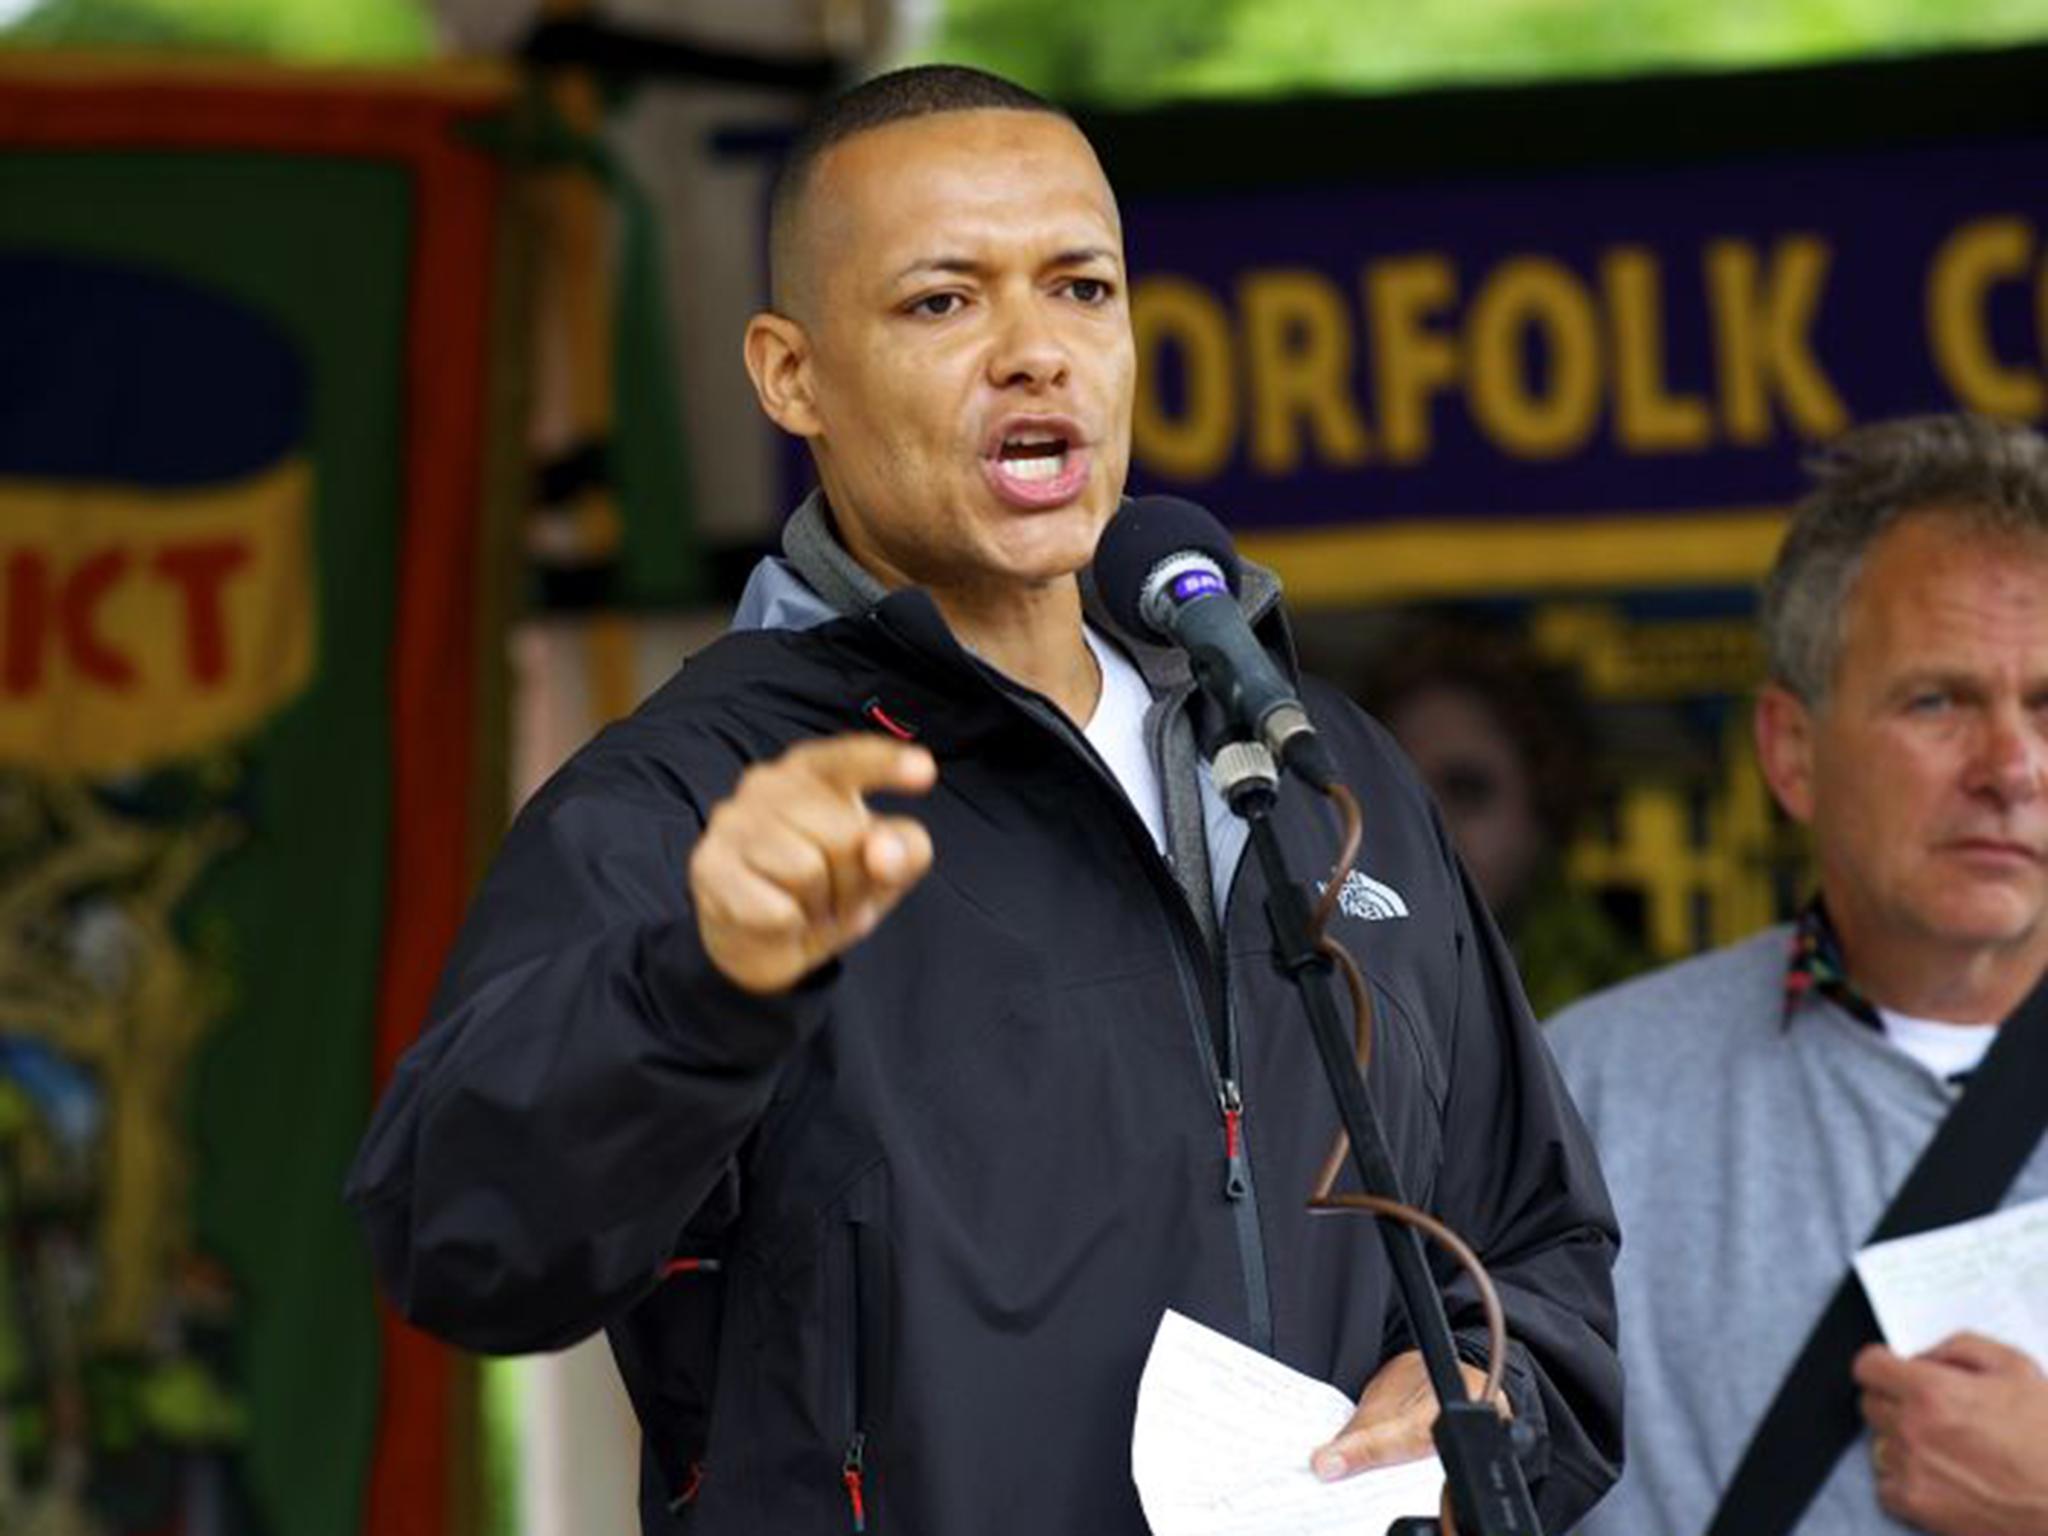 Clive Lewis has been elected to Westminster as the Labour MP for Norwich South